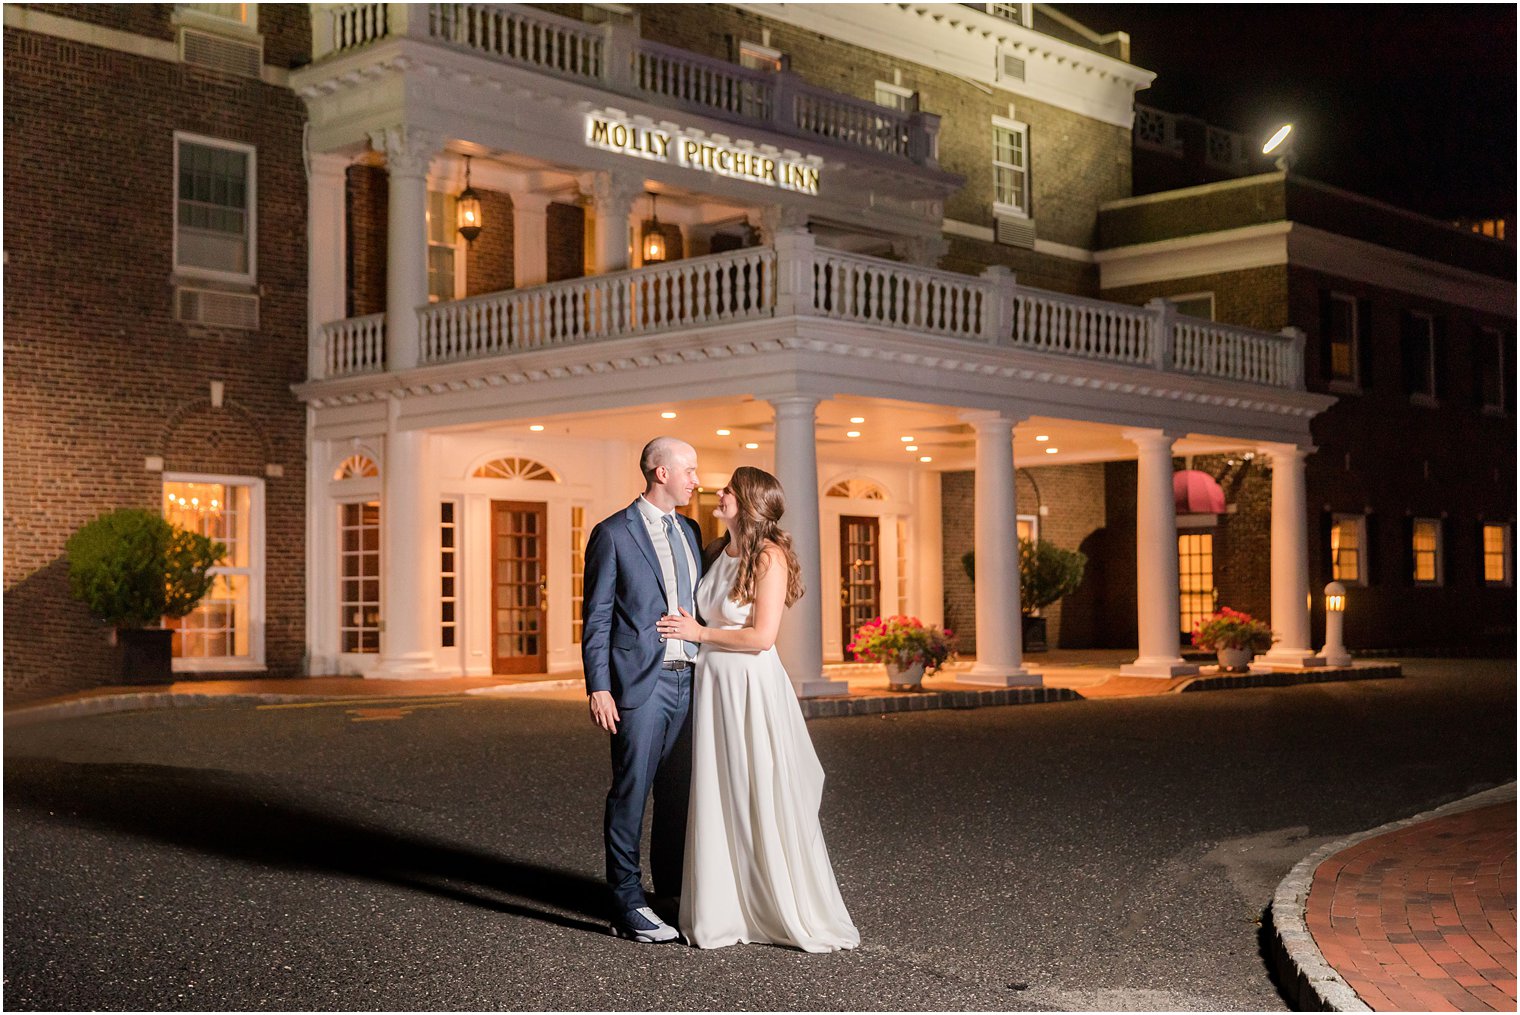 Bride and groom in front of Molly Pitcher Inn at night